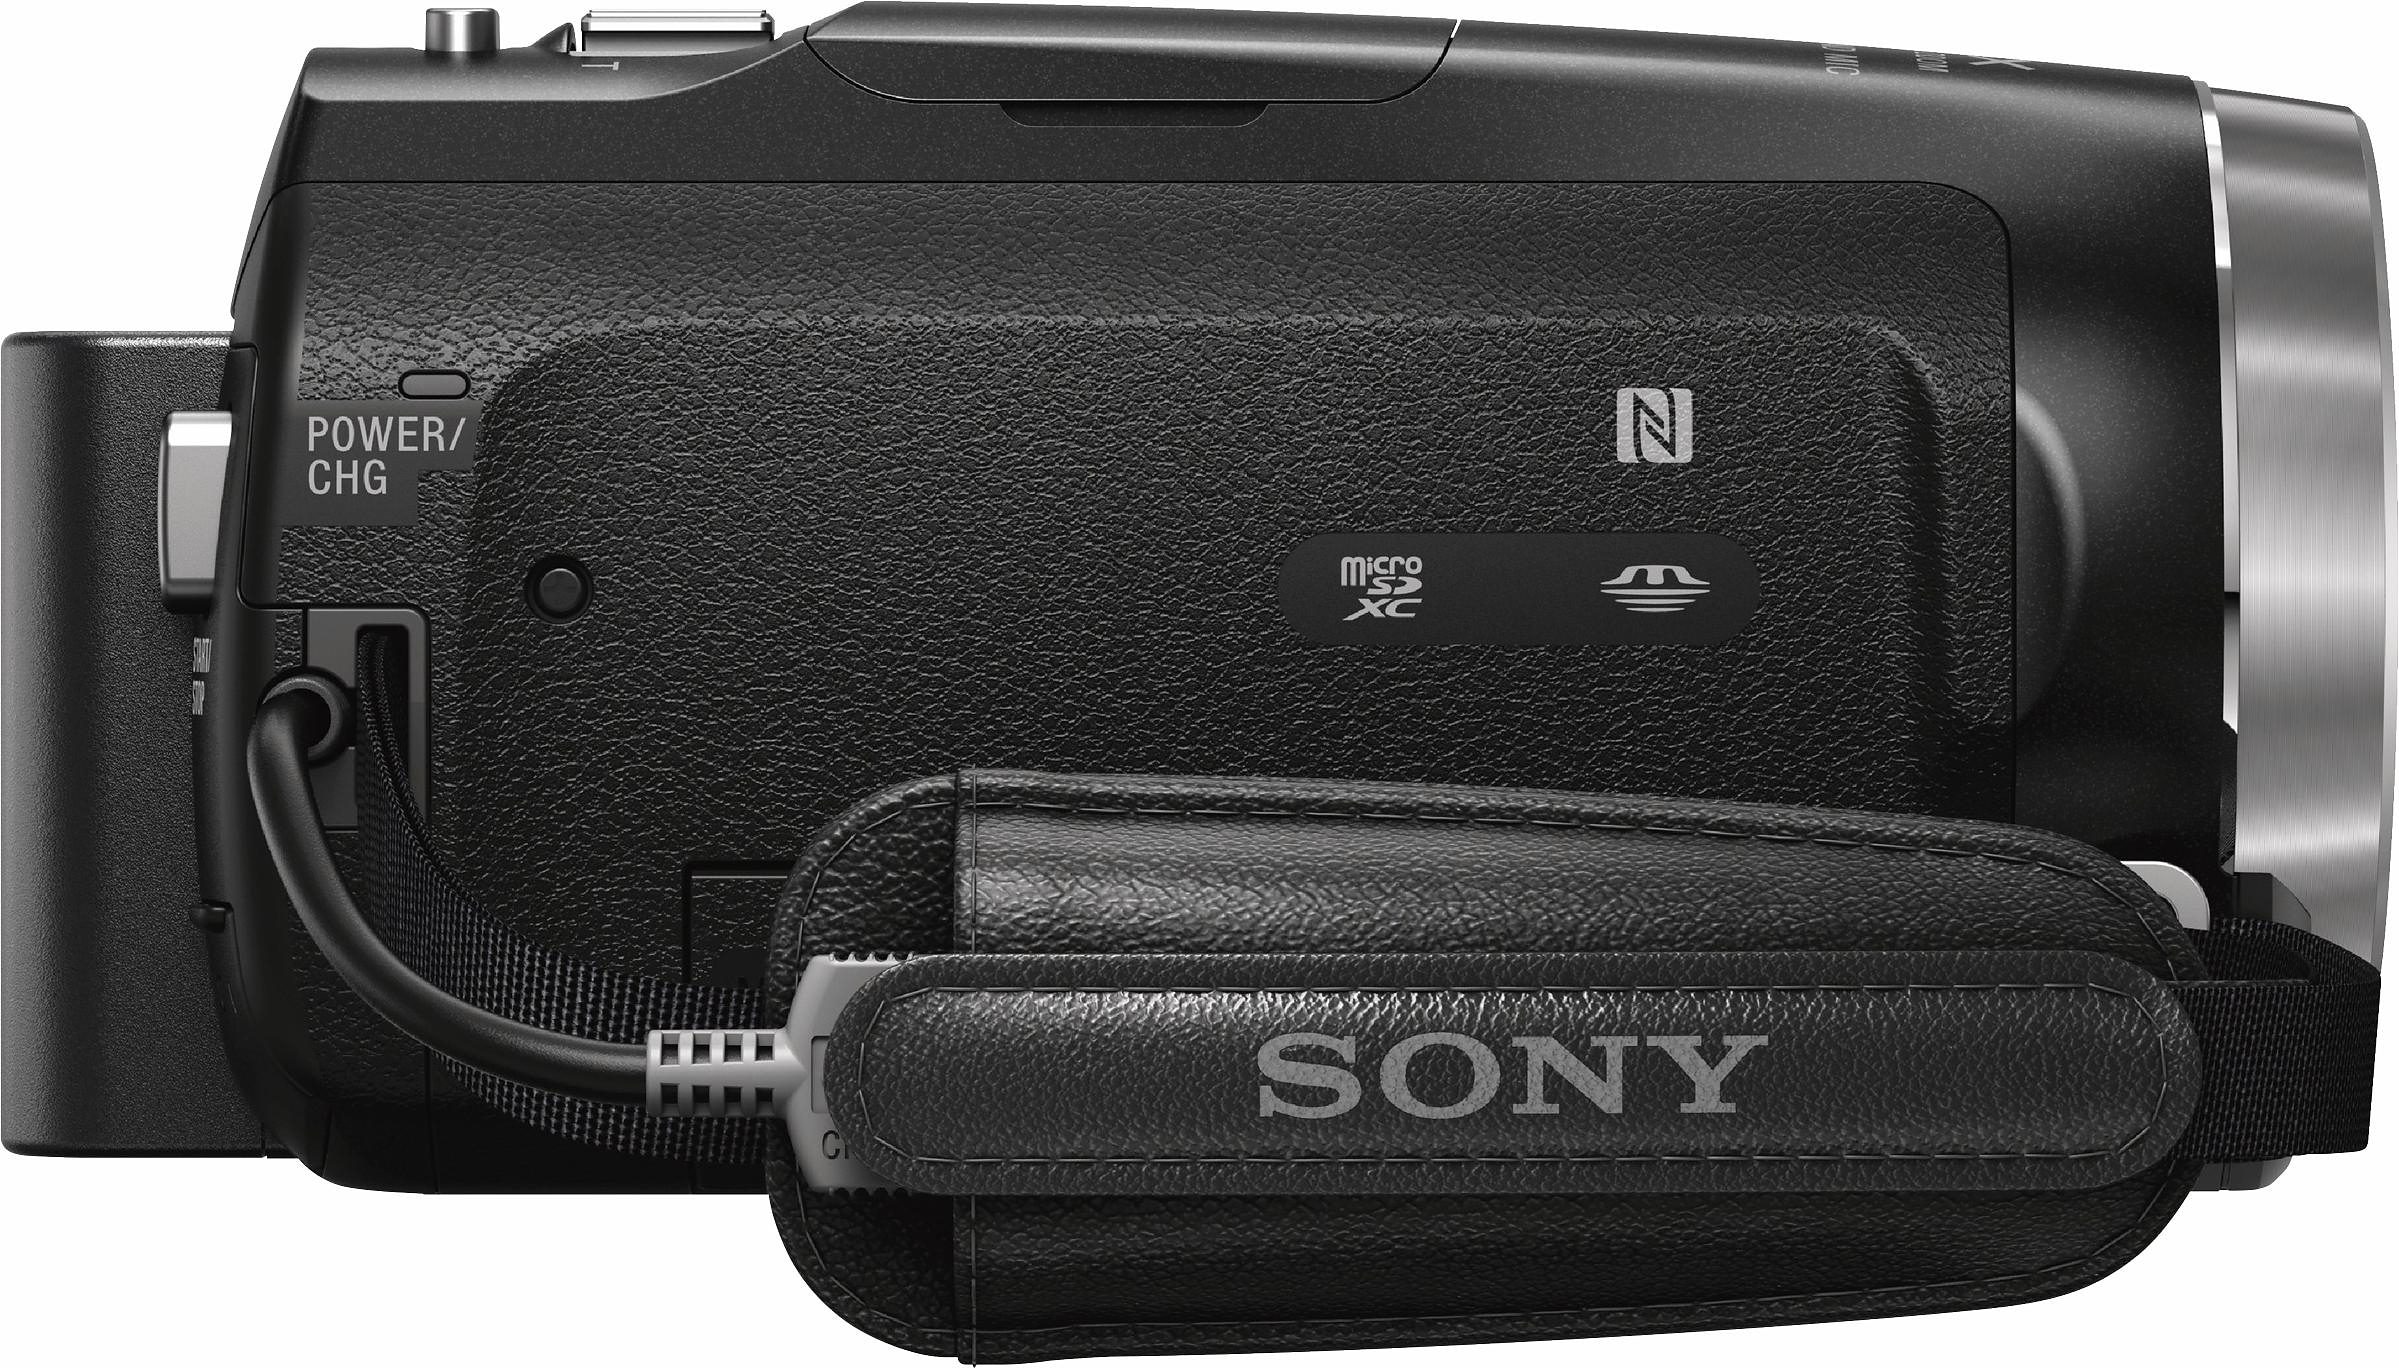 Sony Camcorder »HDR-CX625B«, Full HD, NFC-WLAN (Wi-Fi), 30 fachx opt. Zoom, 26,8mm Weitwinkel